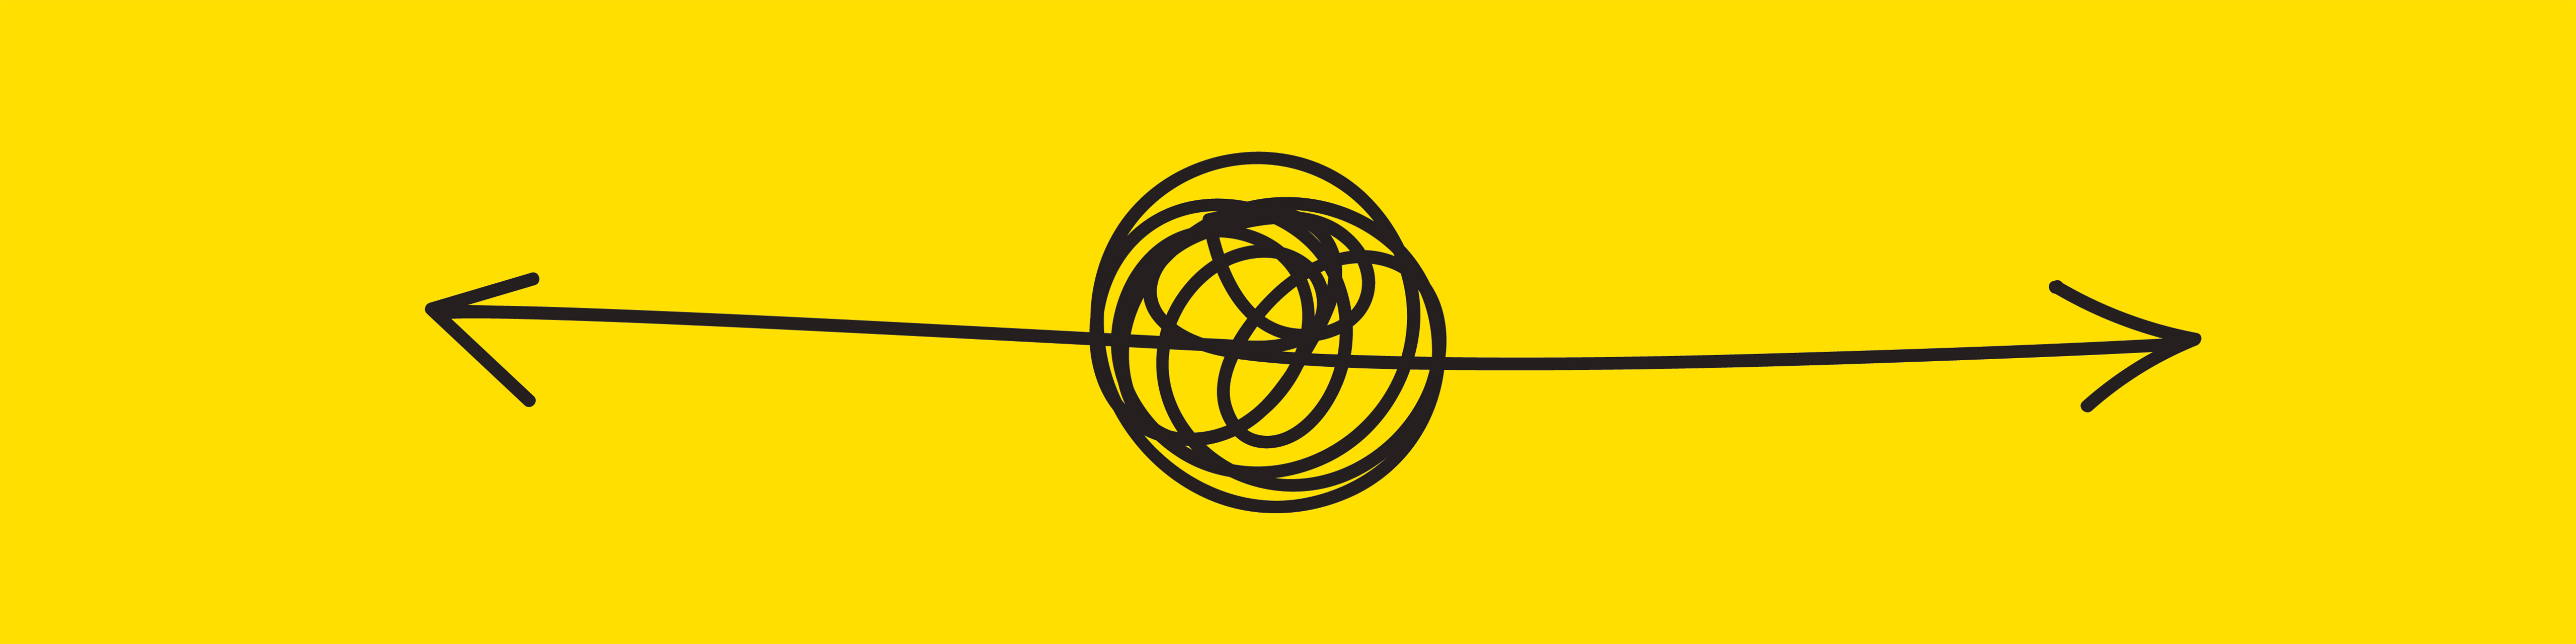 Hand drawn arrows on a yellow background pointing in different directions, with a circular swirl of lines at the center